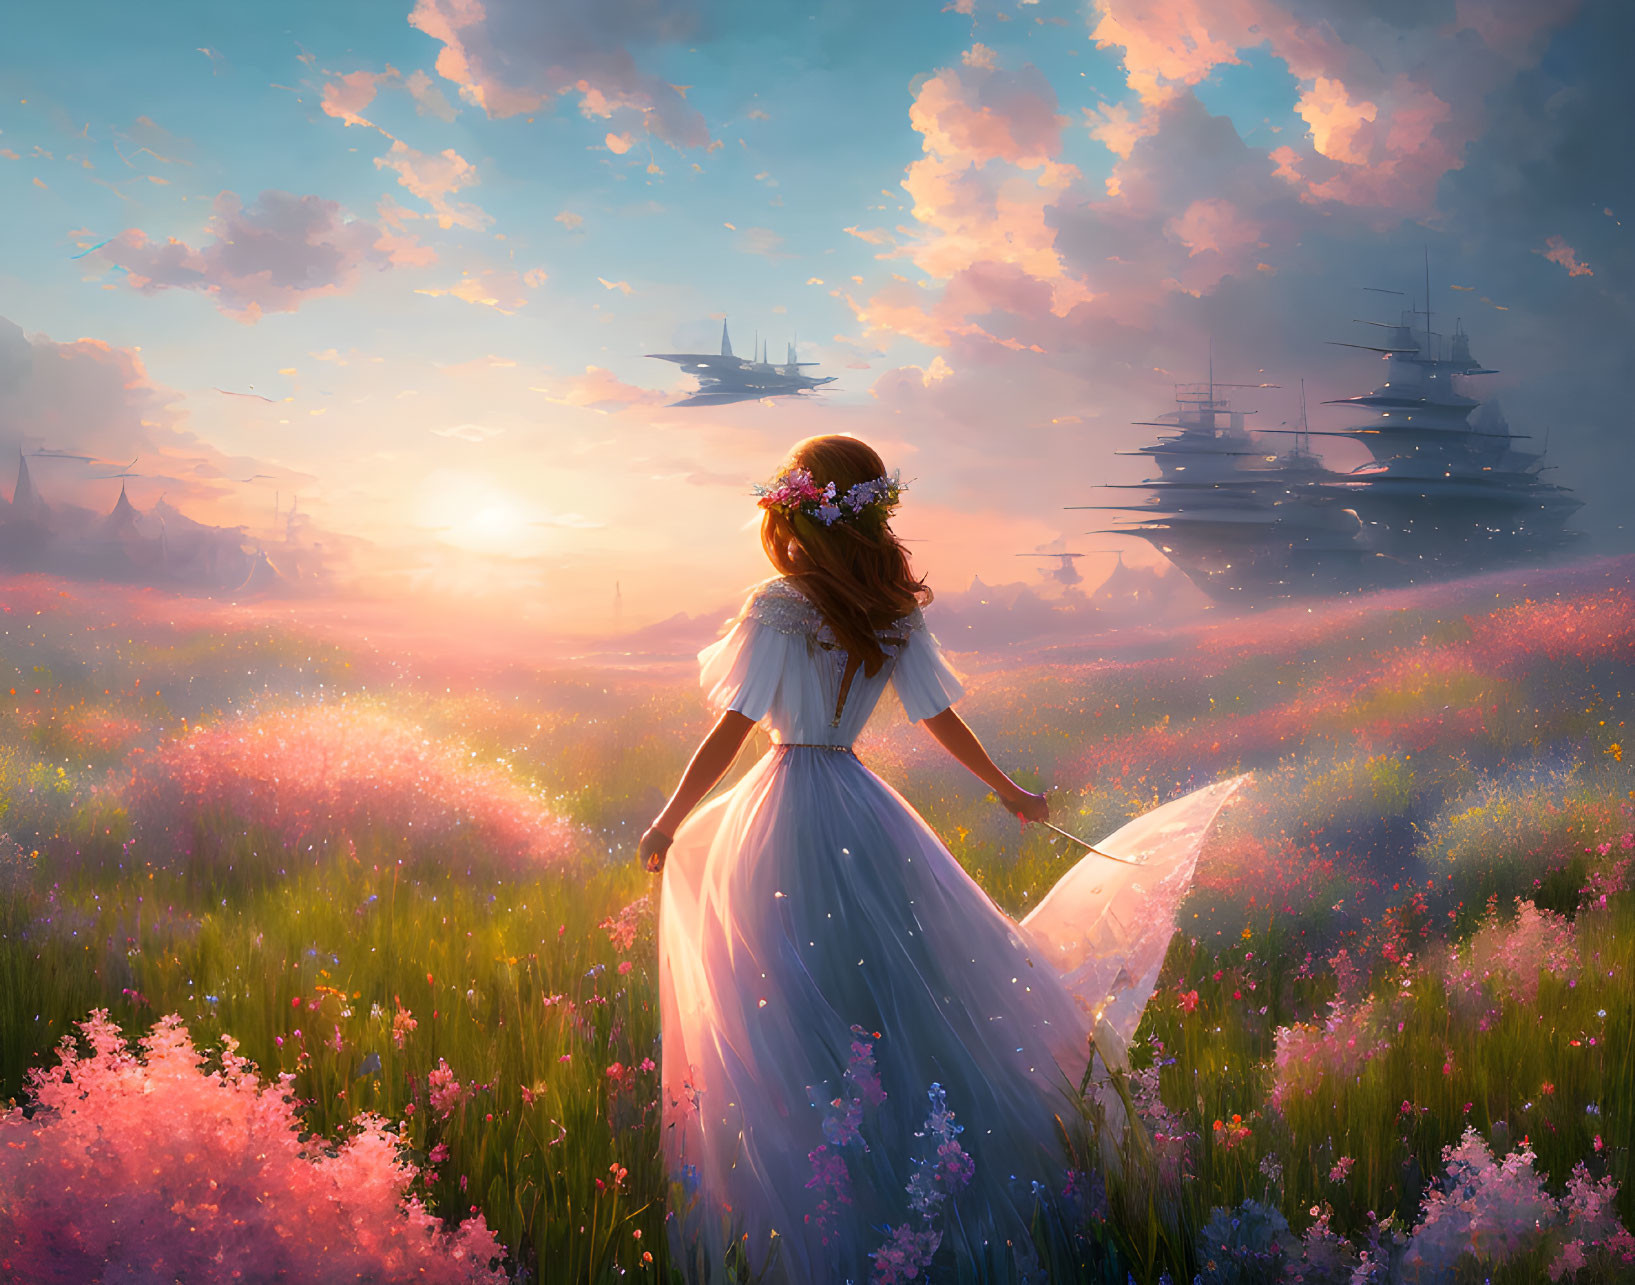 Woman in white dress in vibrant meadow with fantastical ships in sky